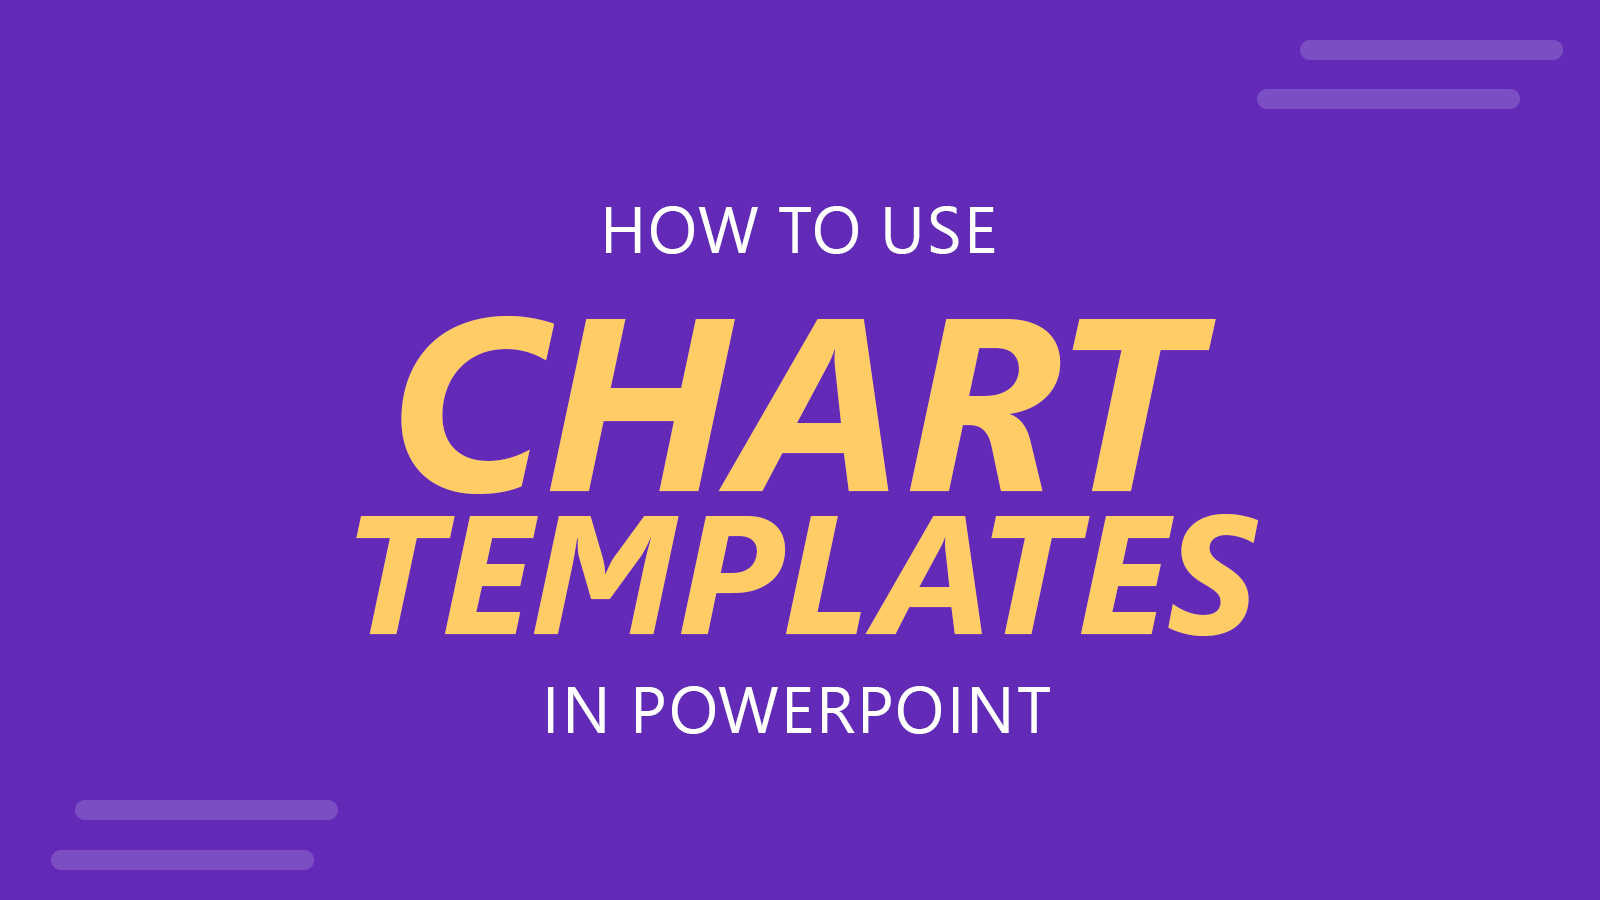 How To Use Chart Templates in PowerPoint to Save Time Designing Data Driven Charts